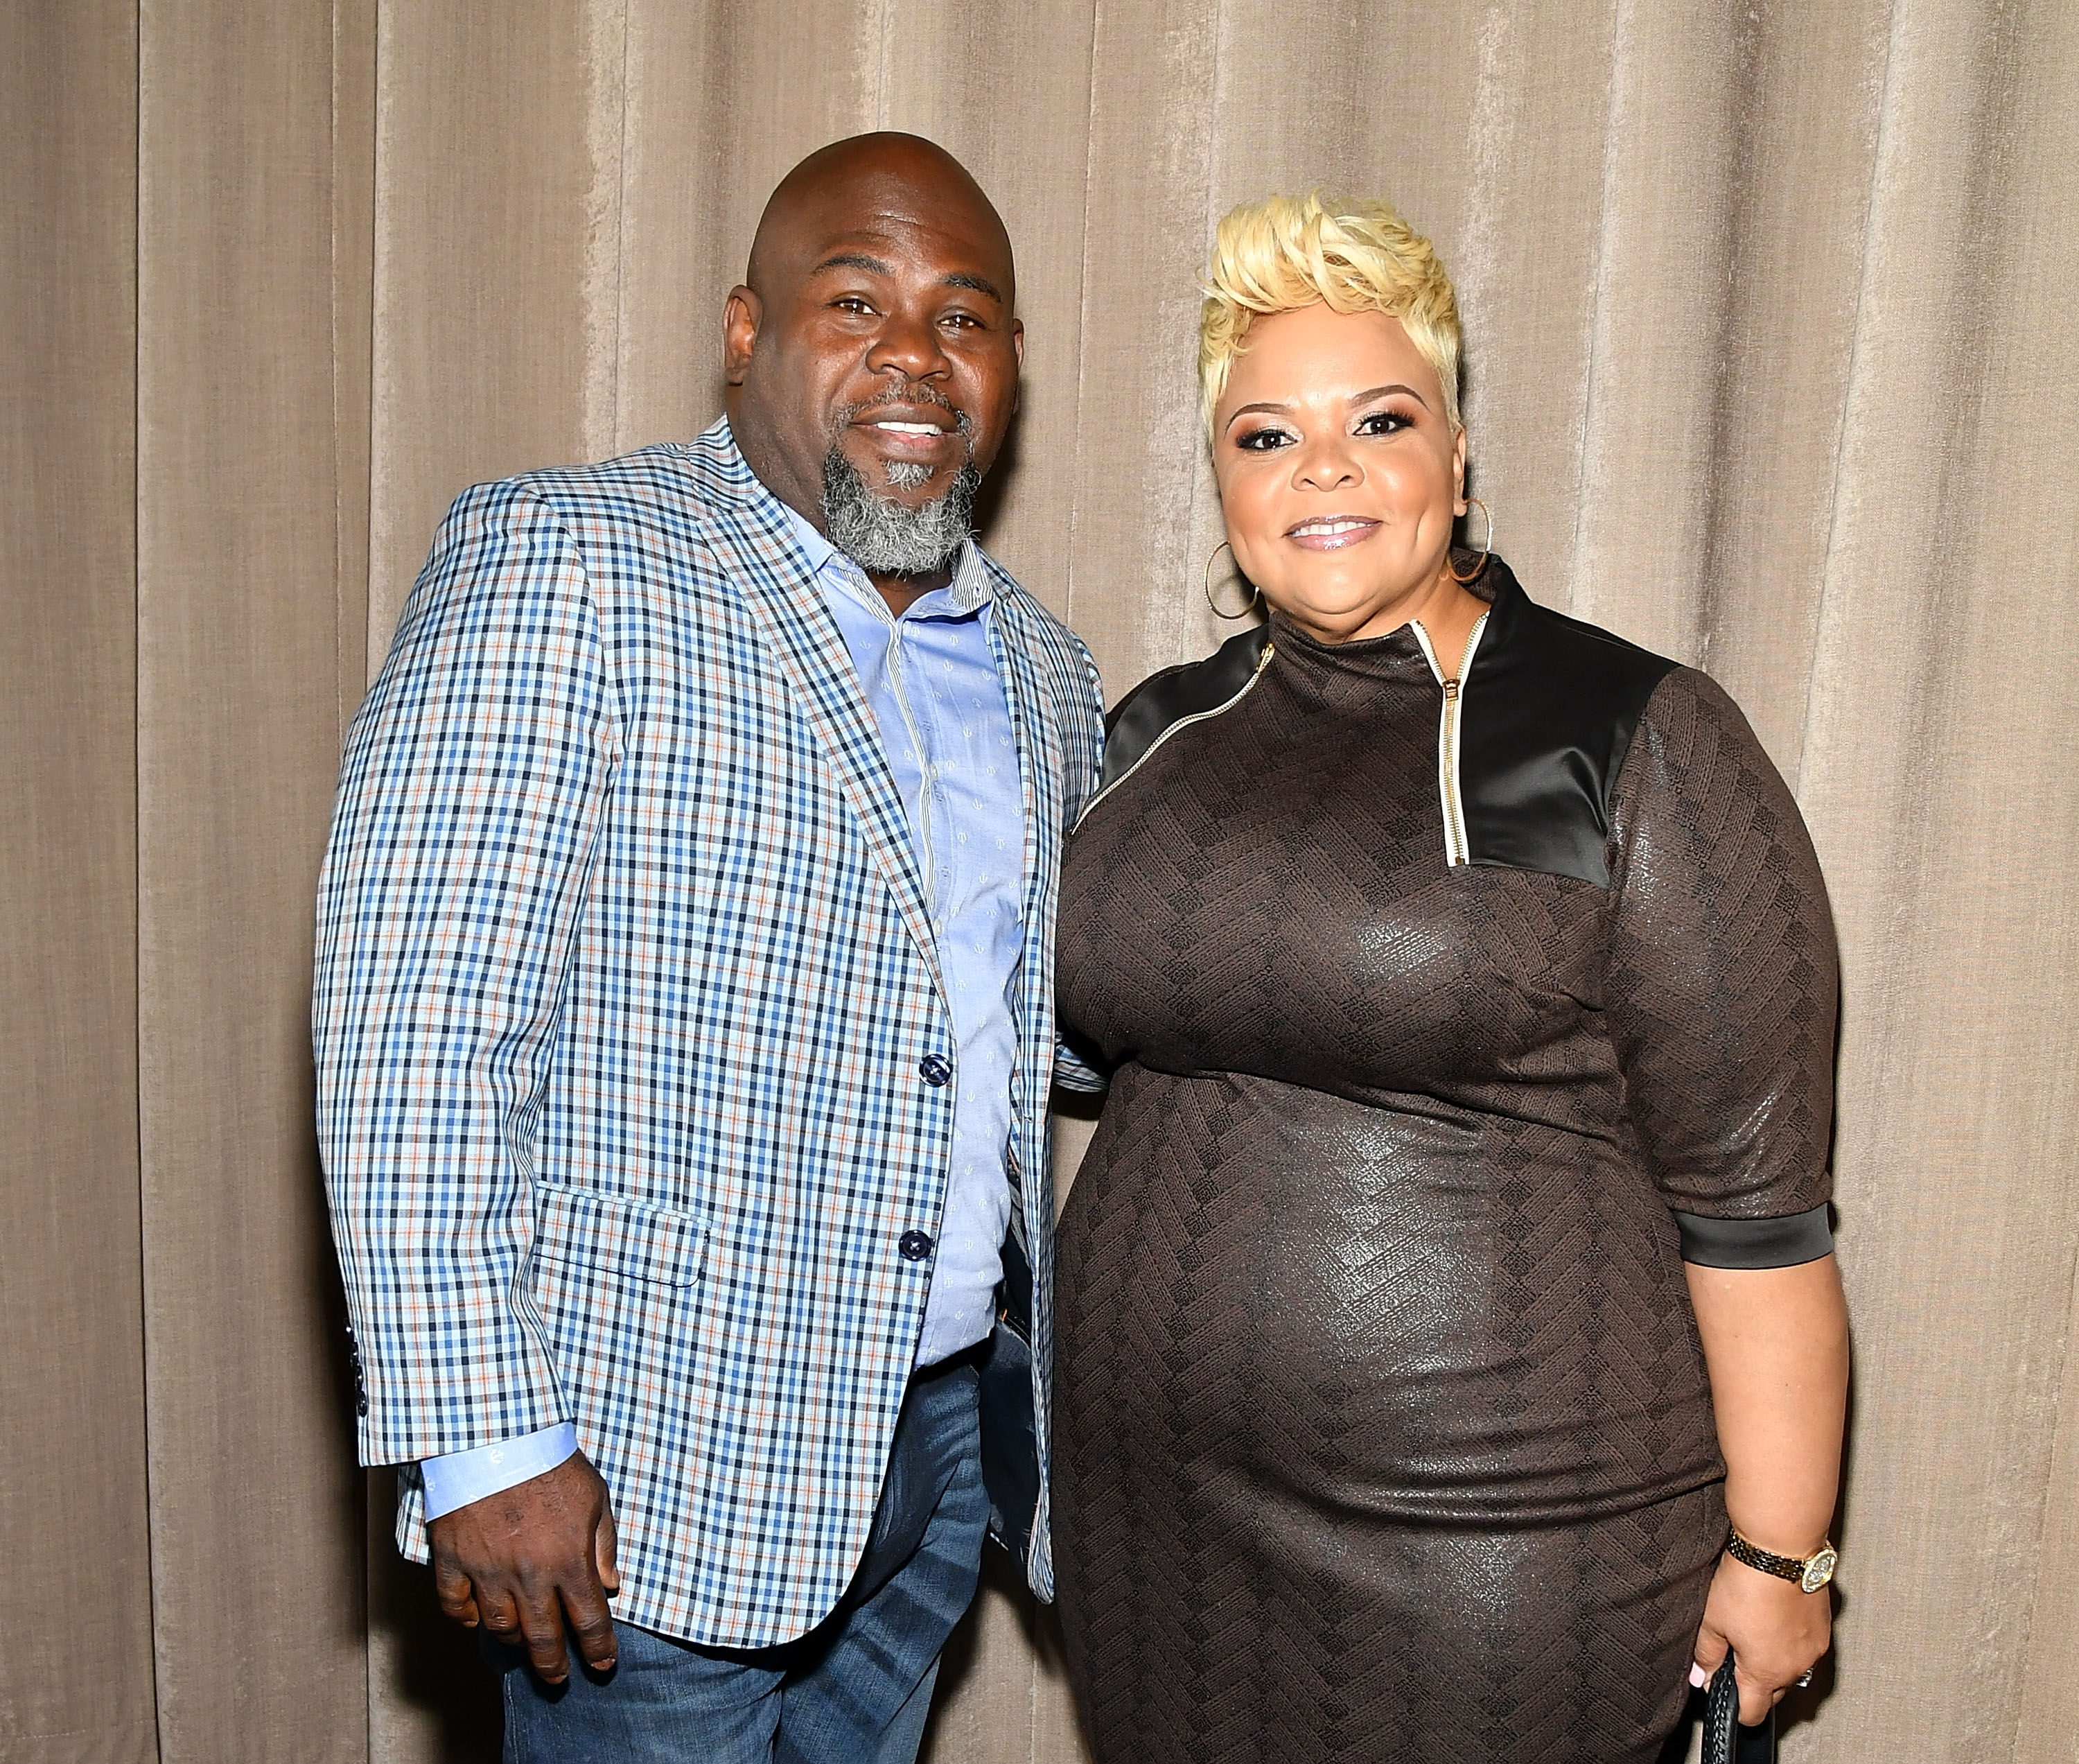  David and Tamela Mann attend TV One Upfront press junket of upcoming 4Q17 and 2018 programming slate at Current at Chelsea Piers on April 20, 2017 | Photo: GettyImages